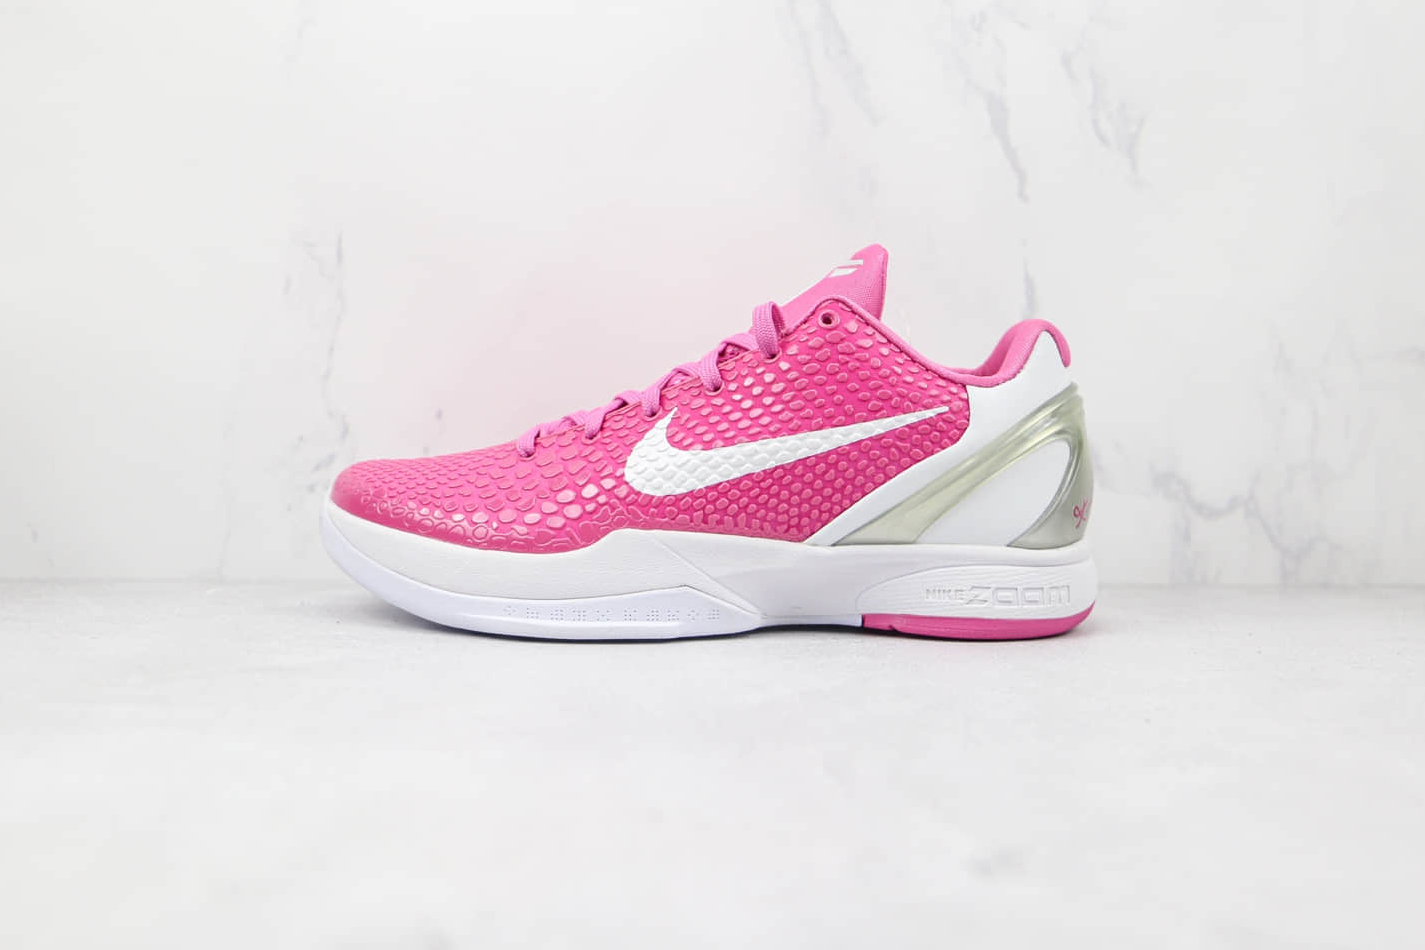 Nike Zoom Kobe 6 Protro Think Pink DJ3596-600 | Limited Edition Basketball Sneakers